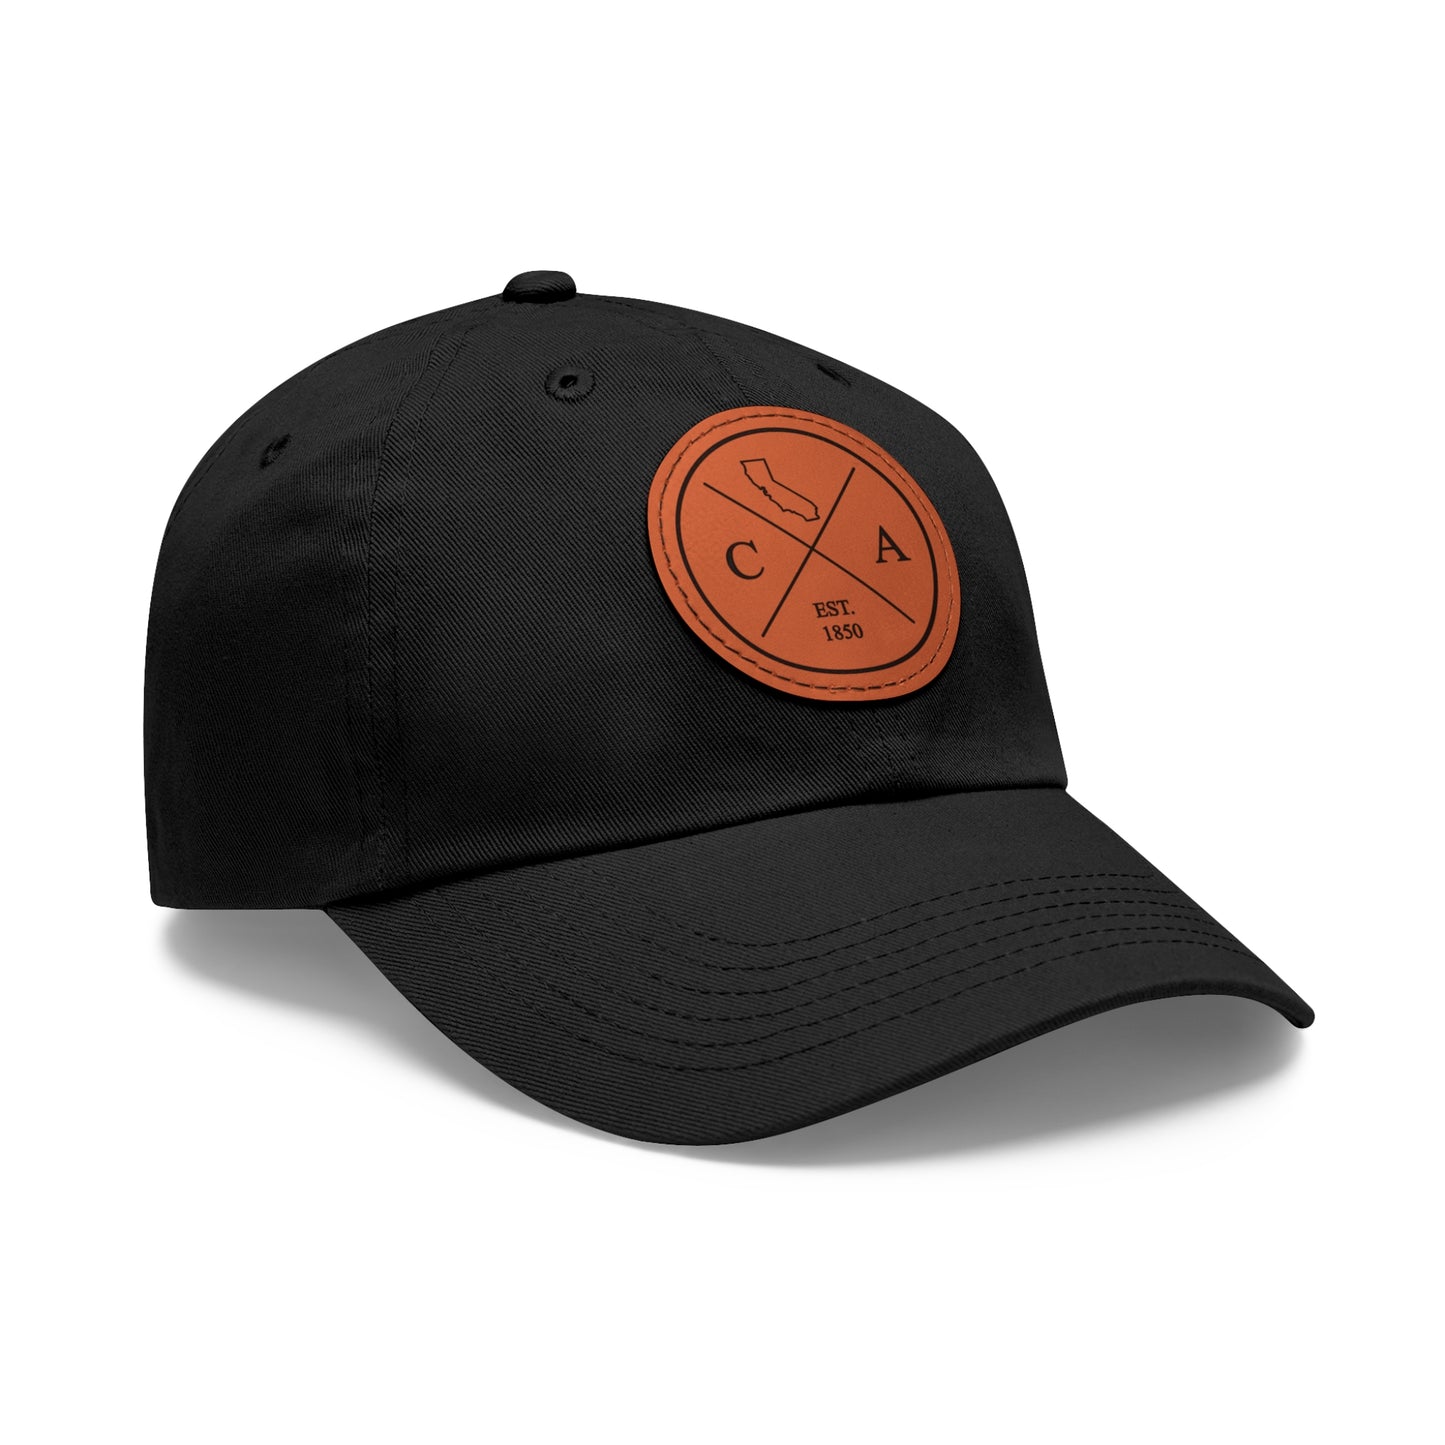 California Dad Hat with Leather Patch